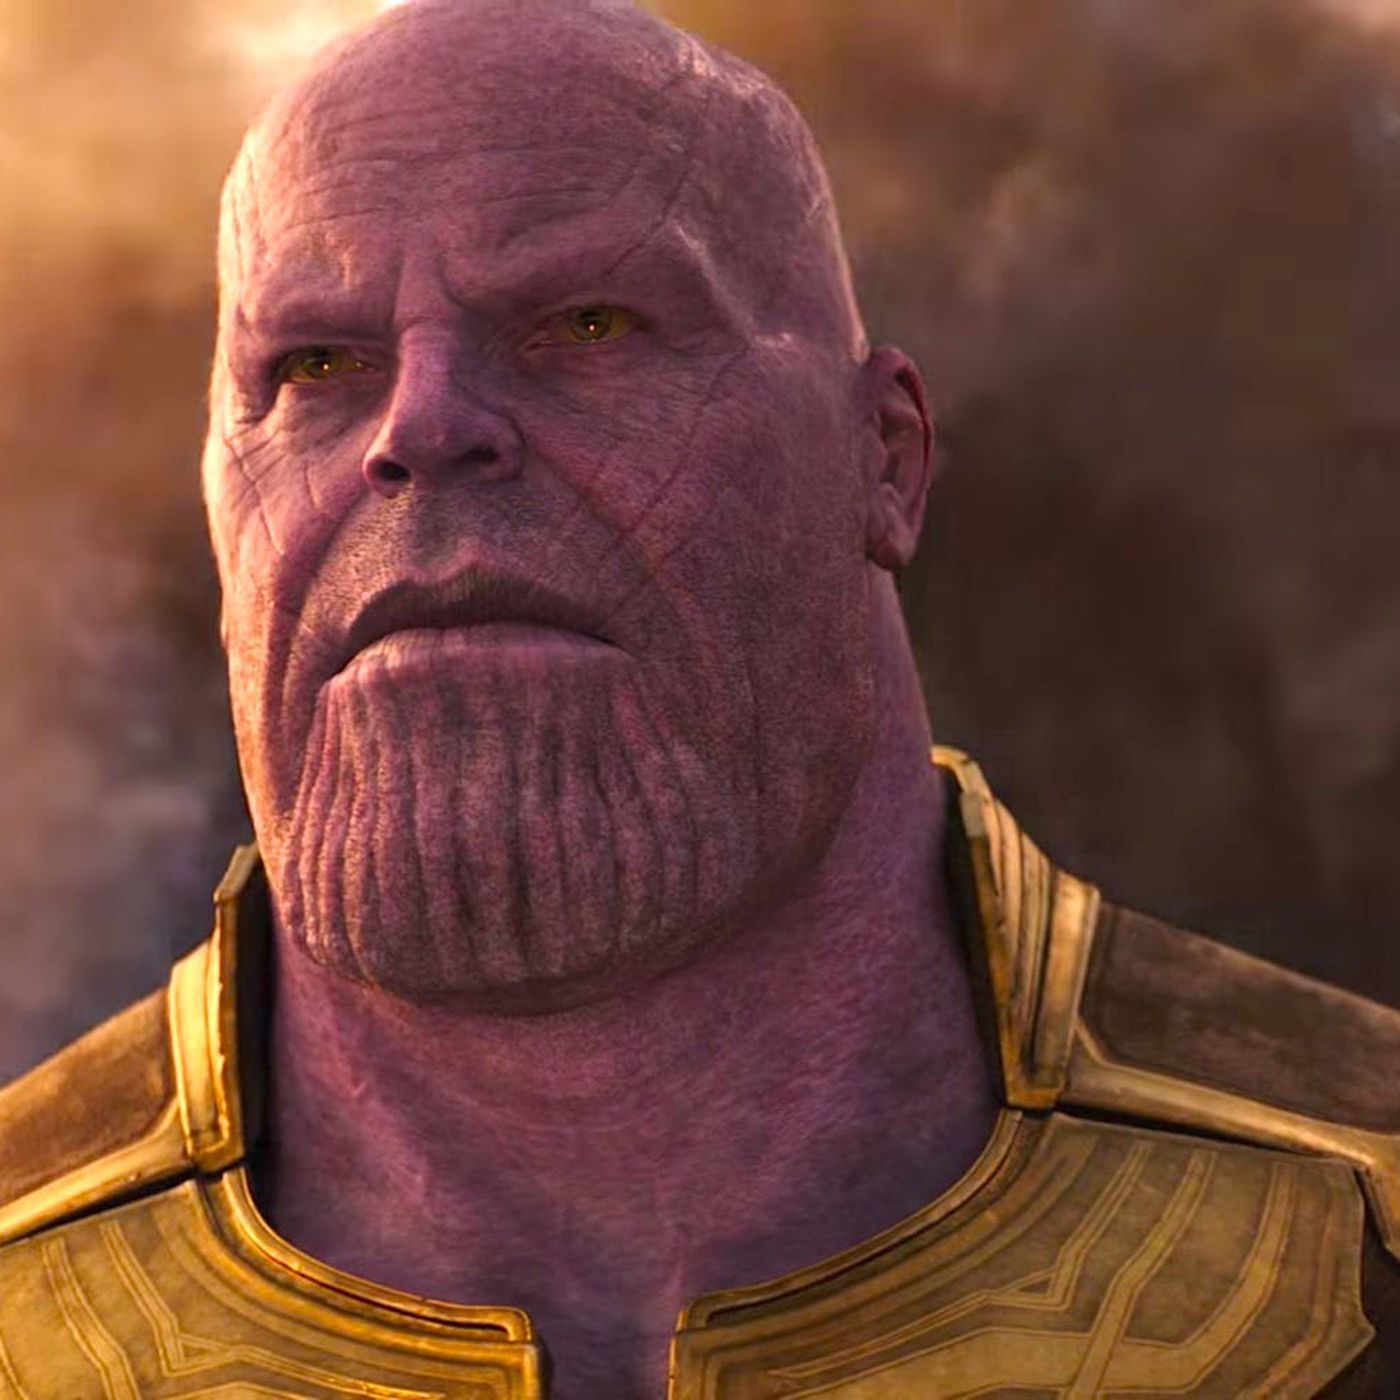 The Thanos subreddit is gleefully heading for mass slaughter